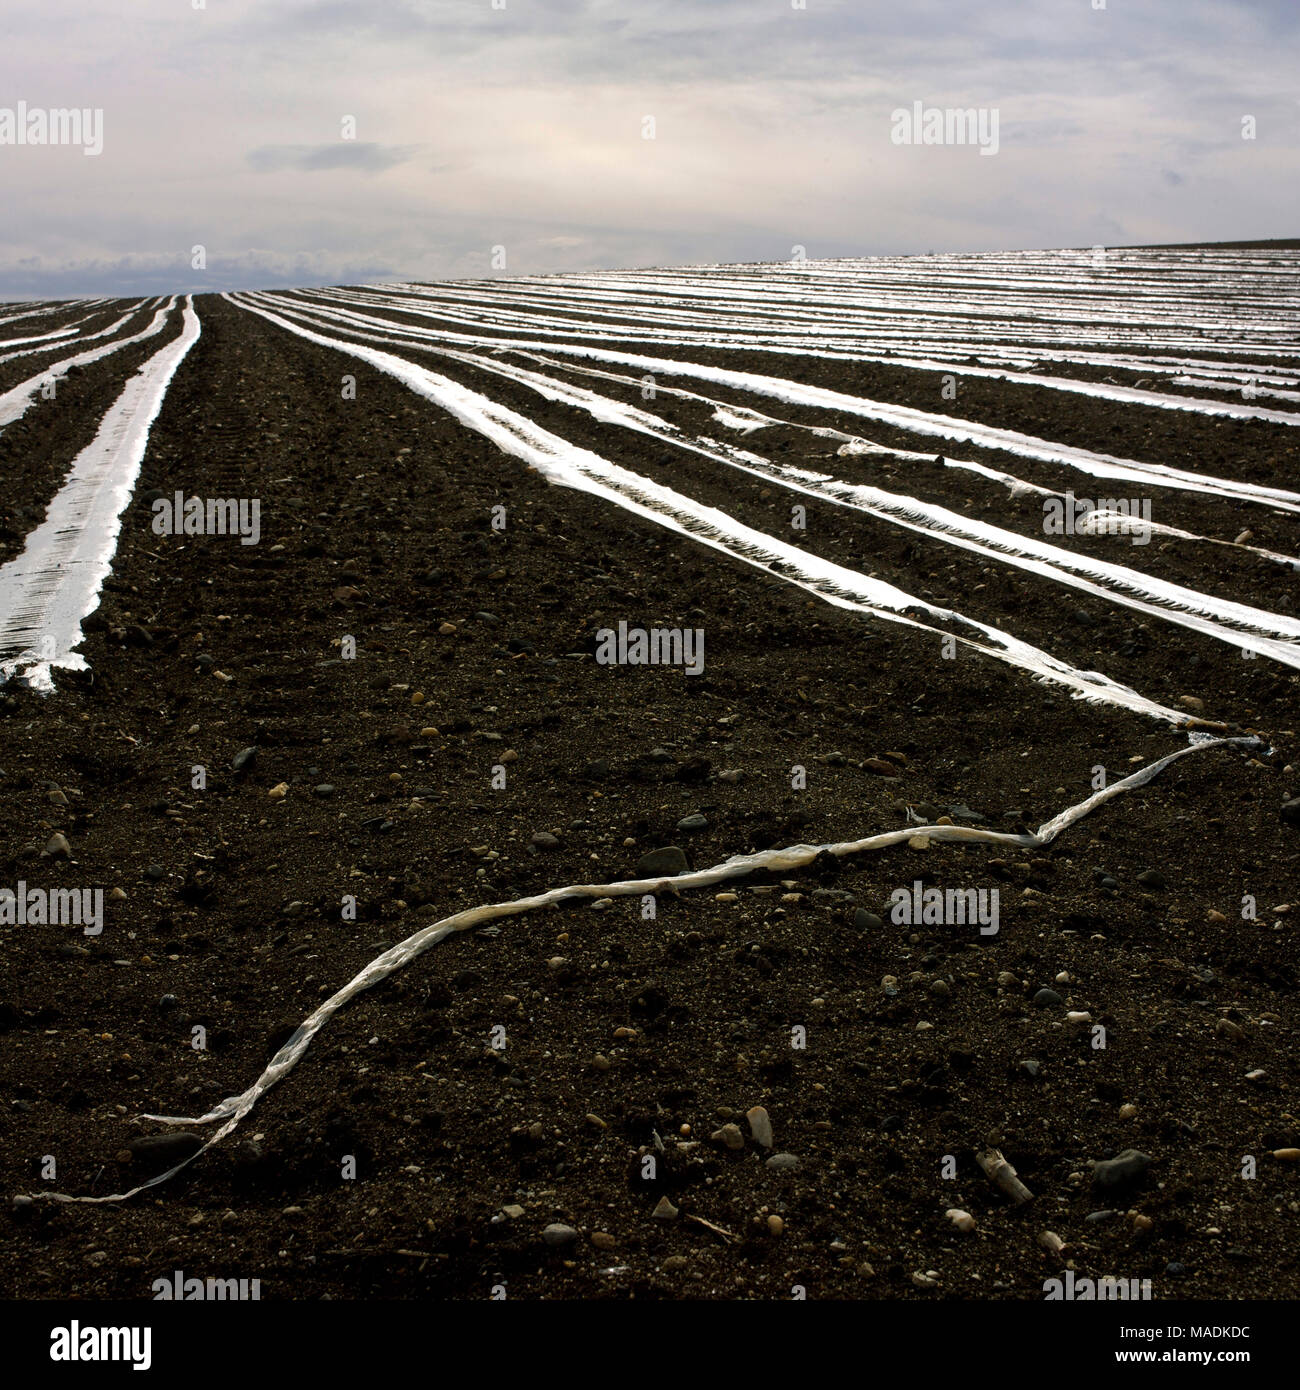 Plastic sheeting on young shoots in a field, Auvergne, France, Europe Stock Photo